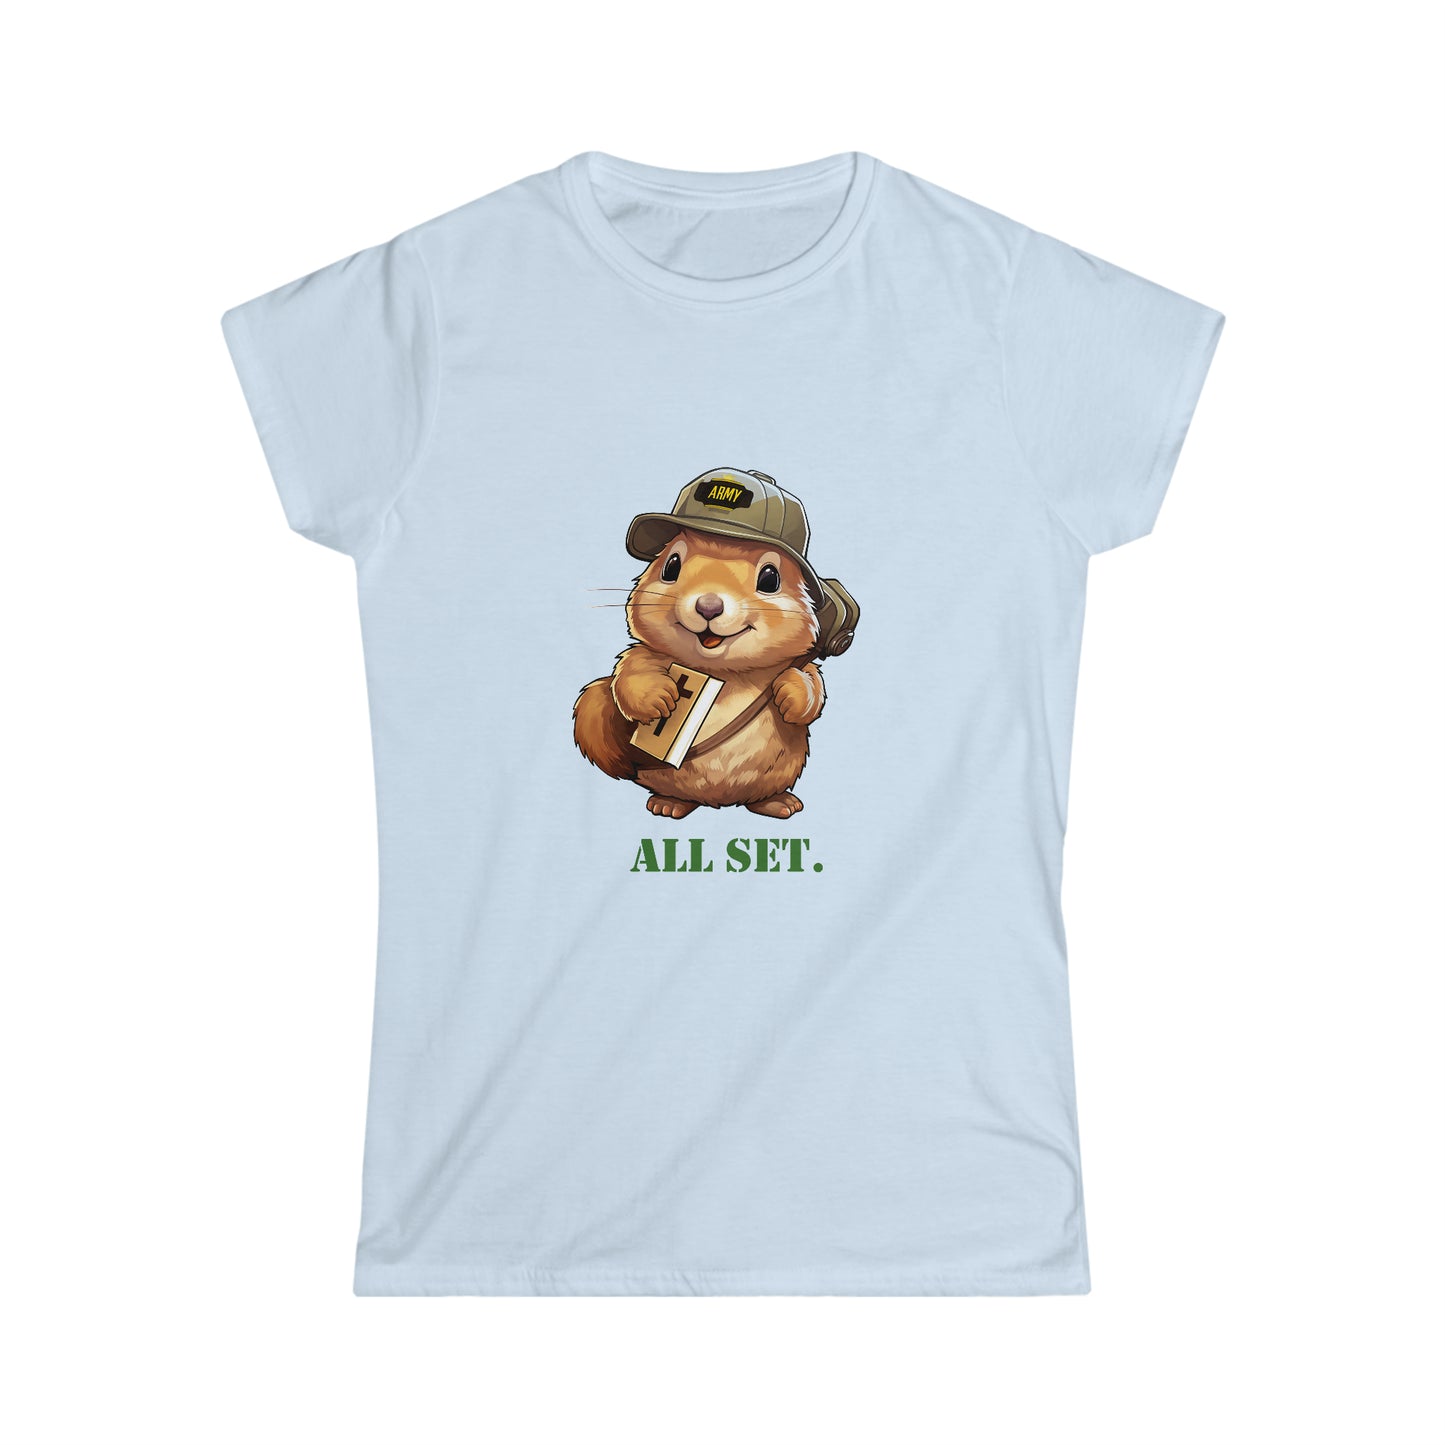 Christian T-Shirt for Women - Softstyle Tee - Army Marmot with his Bible